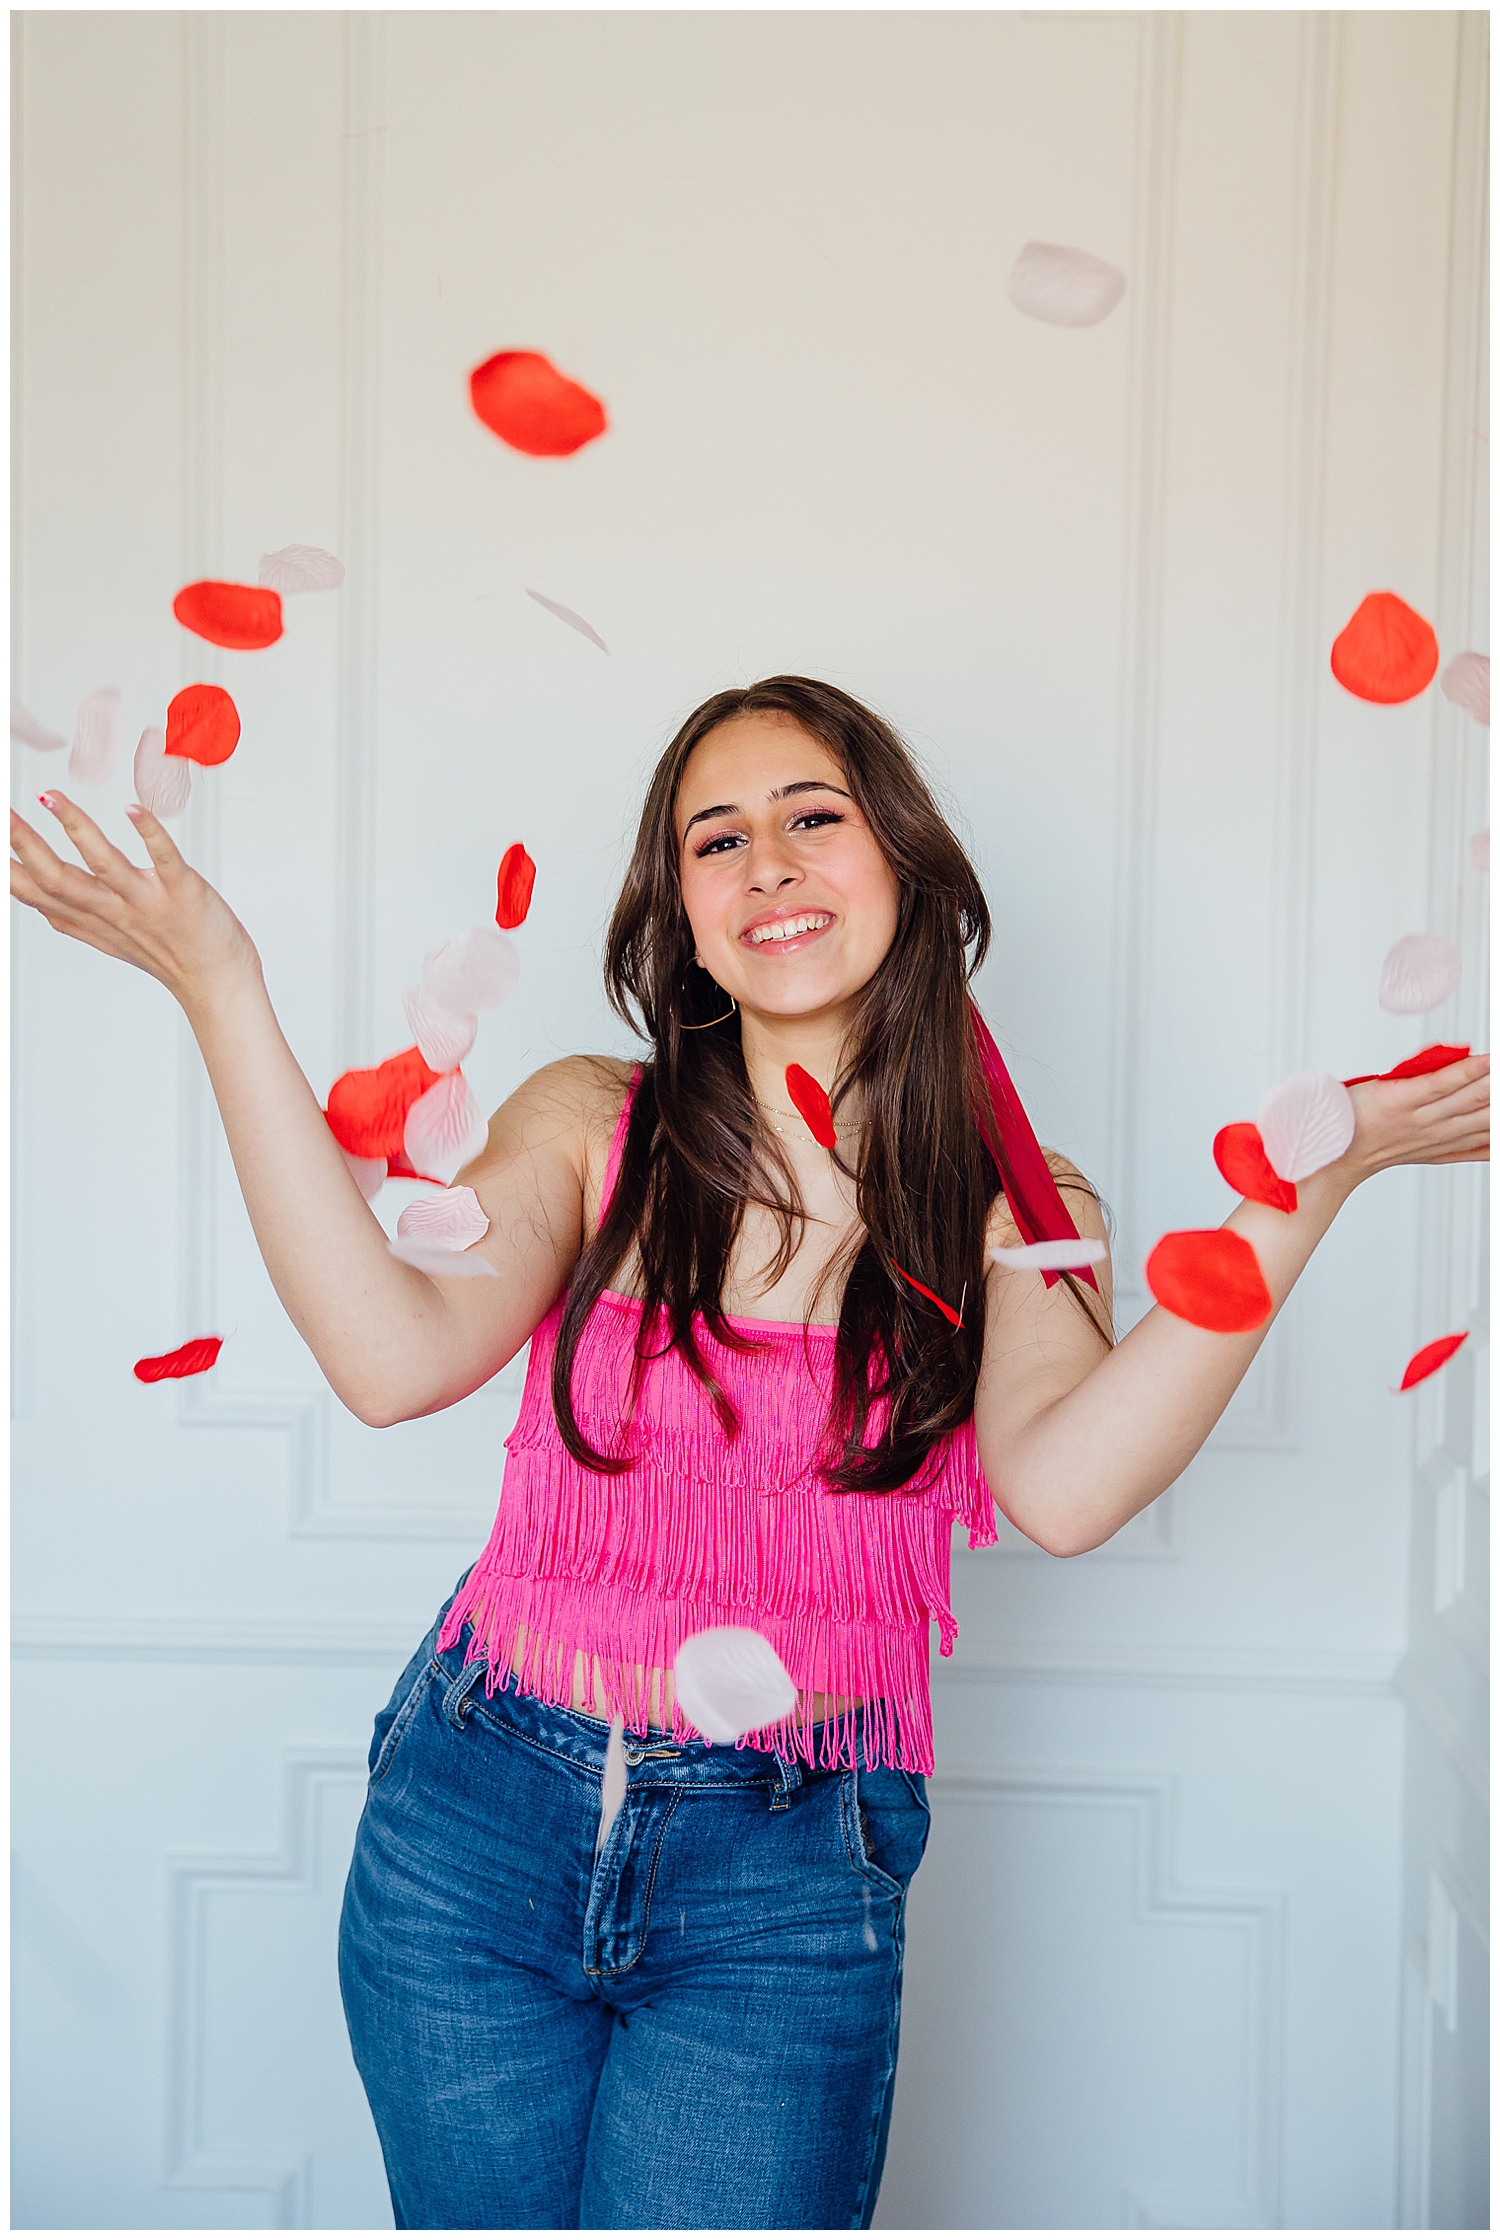 high school senior girl in hot pink and jeans throwing up rose petals for Valentine's Day Senior Photoshoot